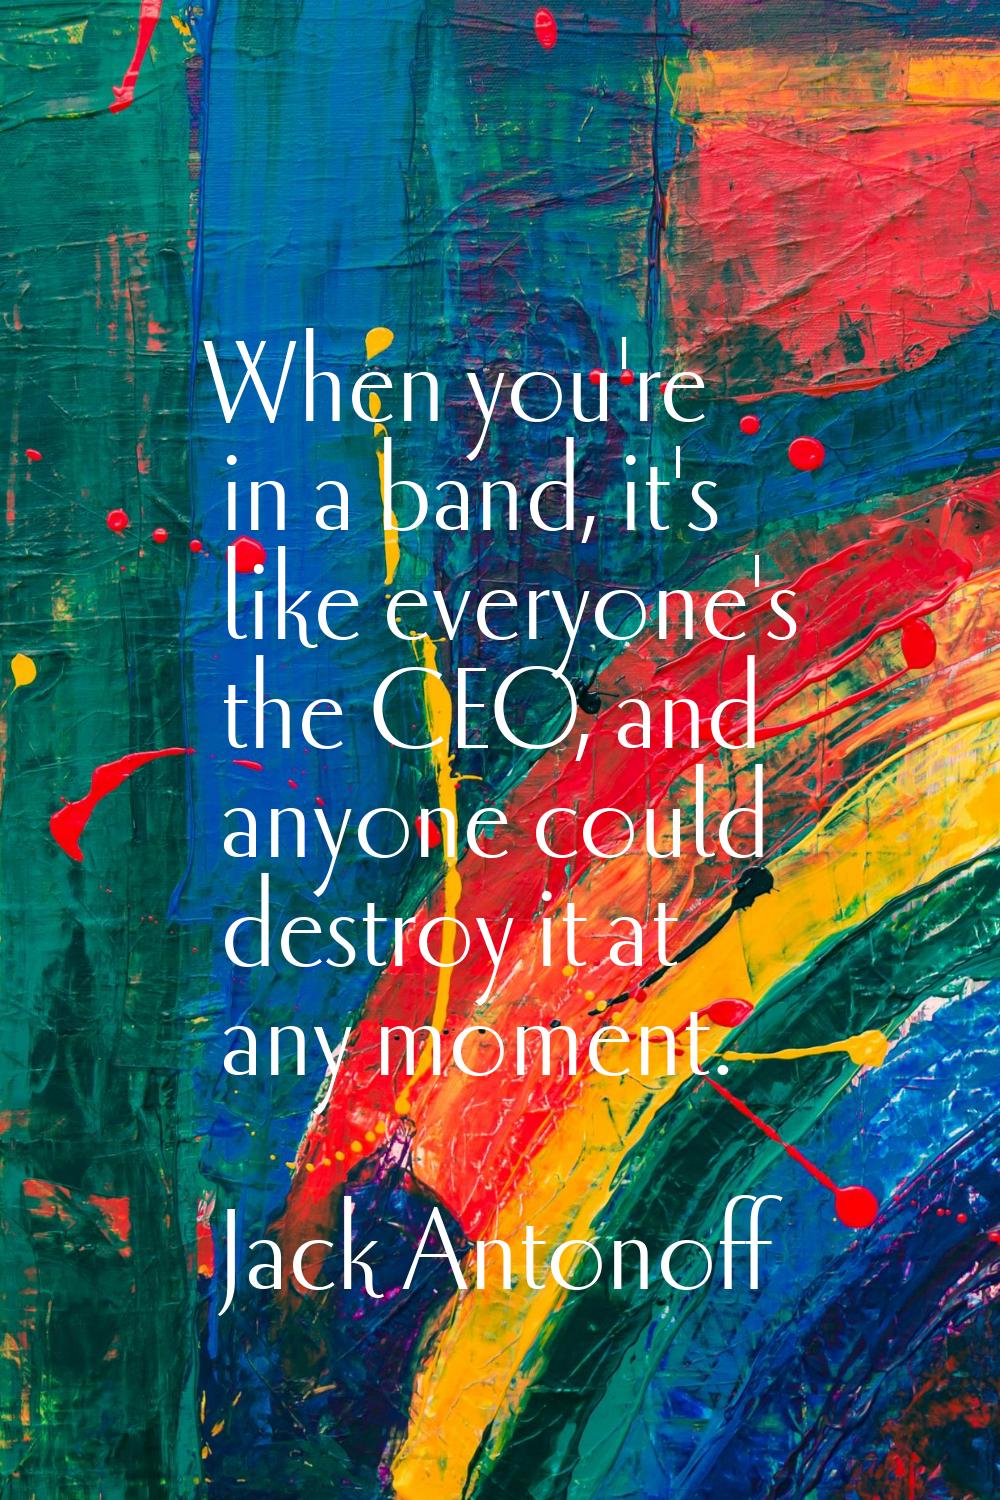 When you're in a band, it's like everyone's the CEO, and anyone could destroy it at any moment.